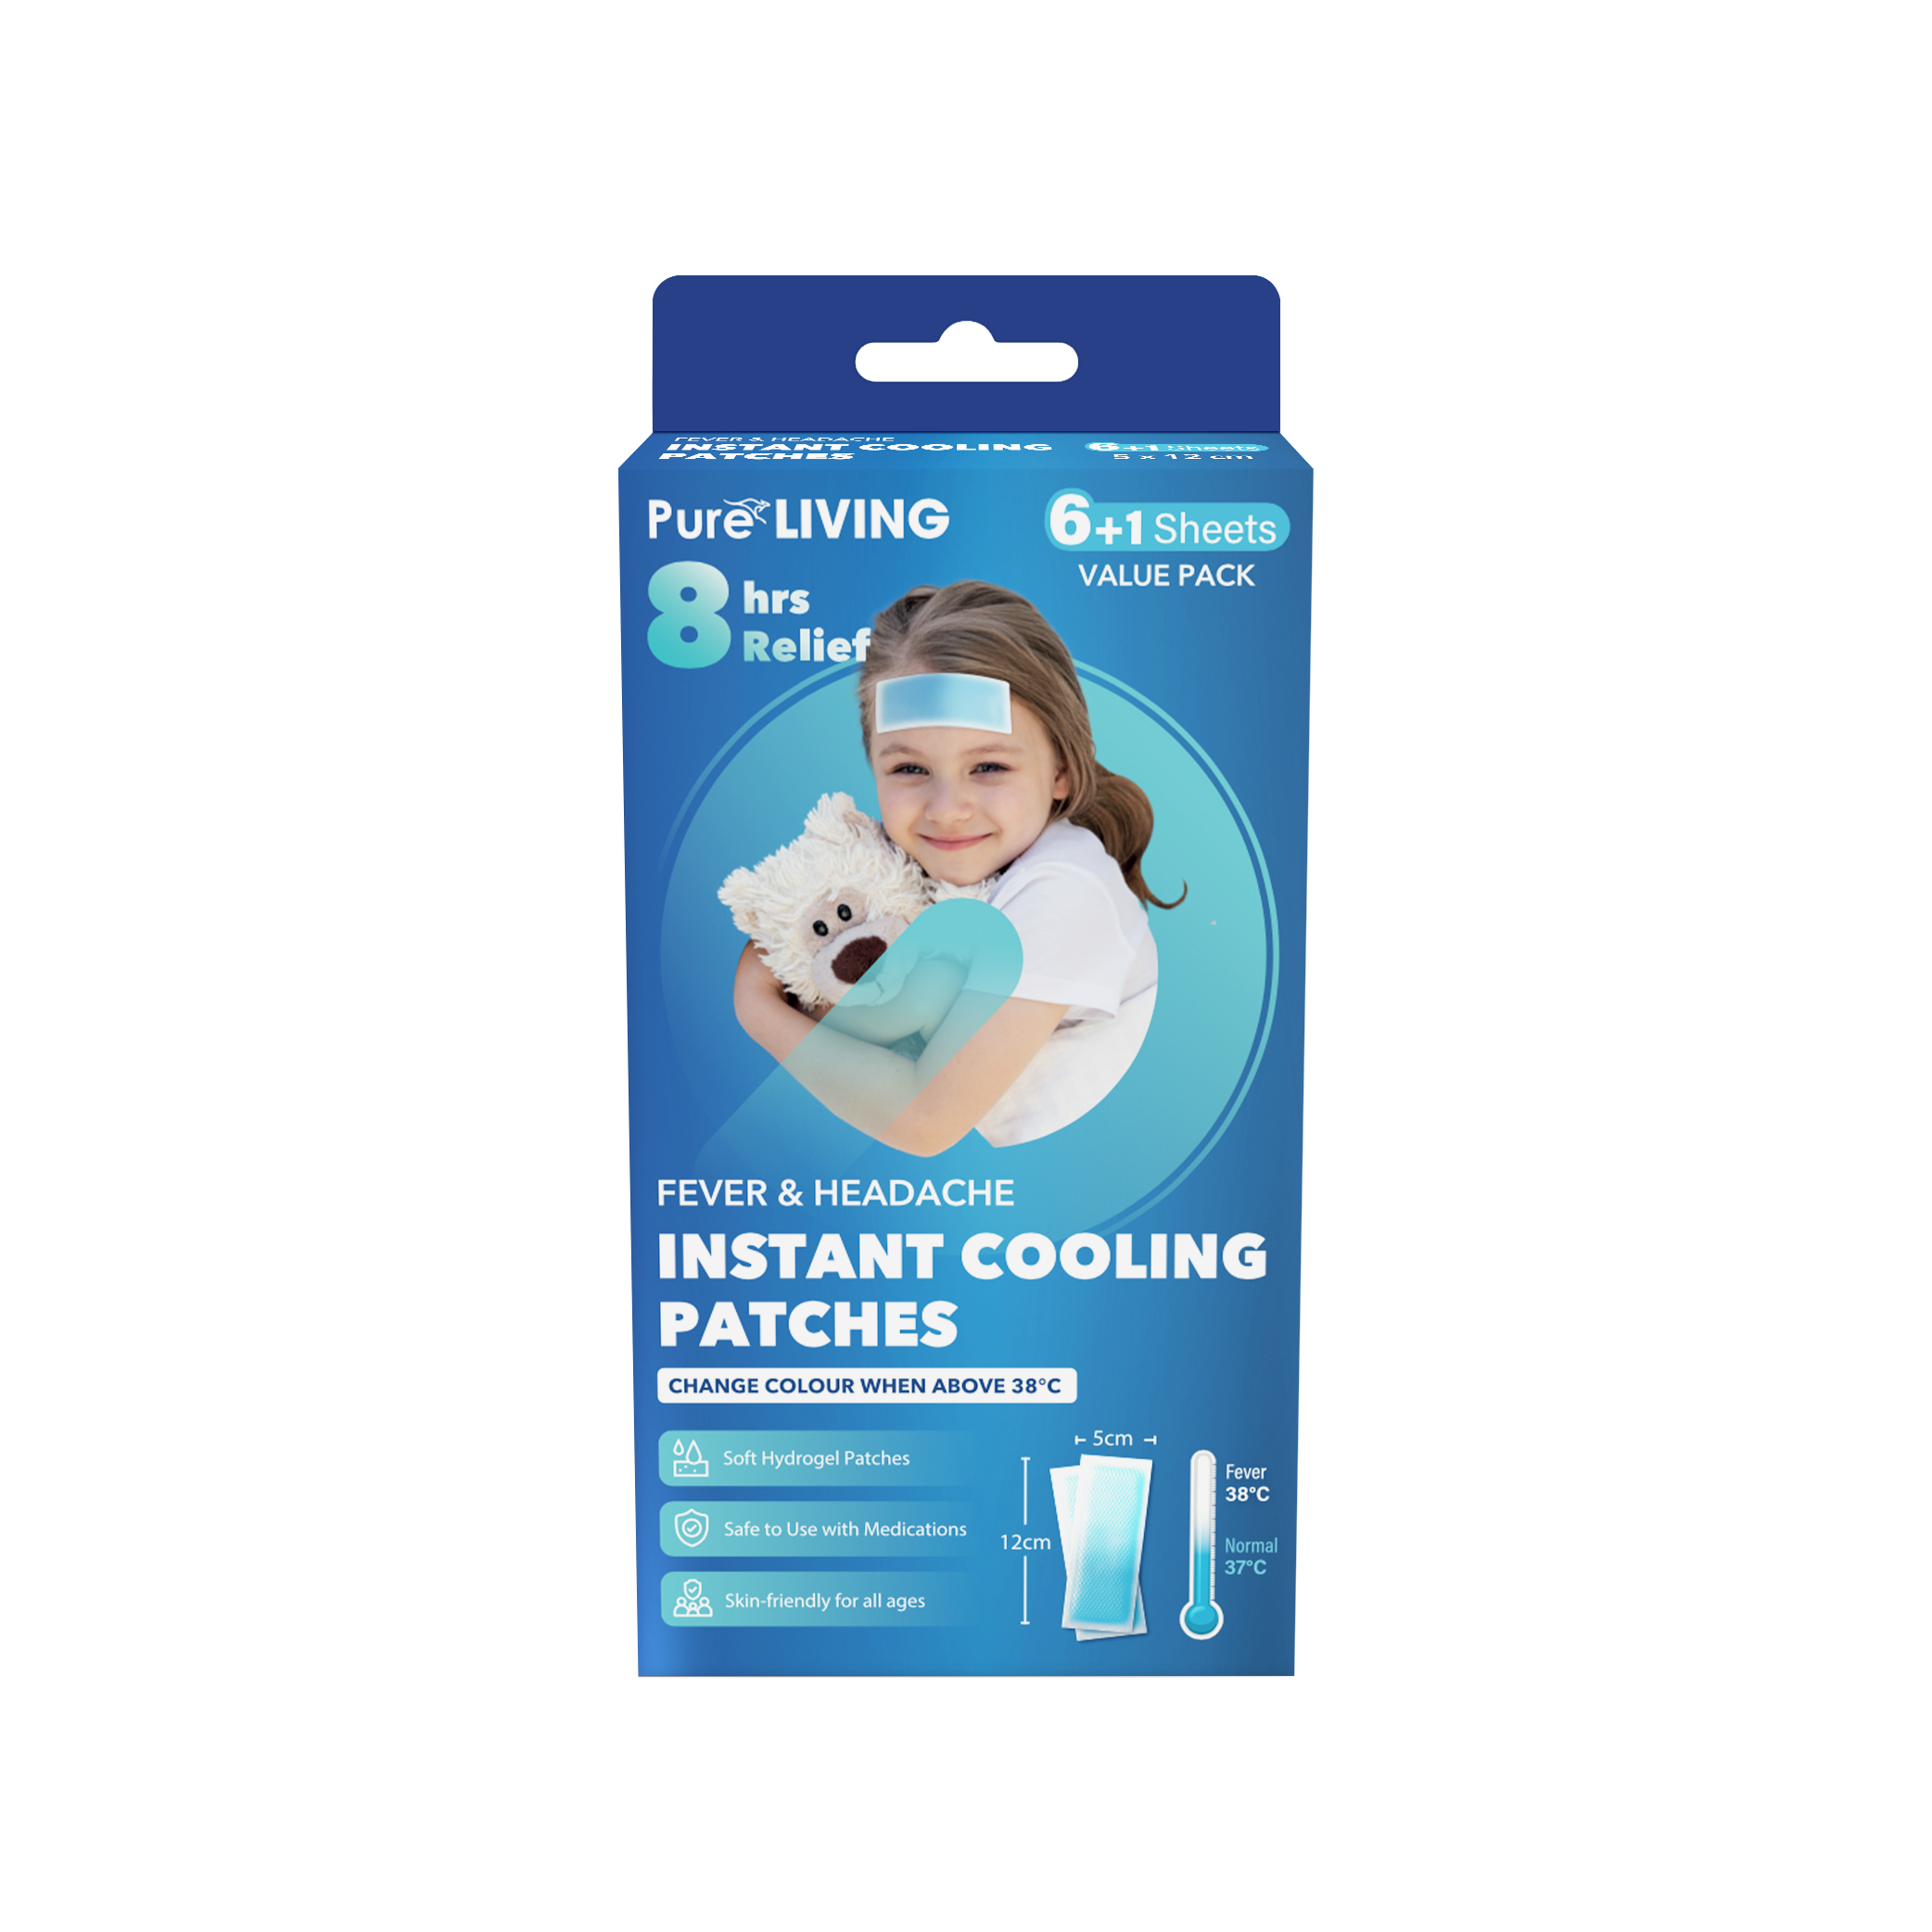 Instant Cooling Patches 6+1 Sheets